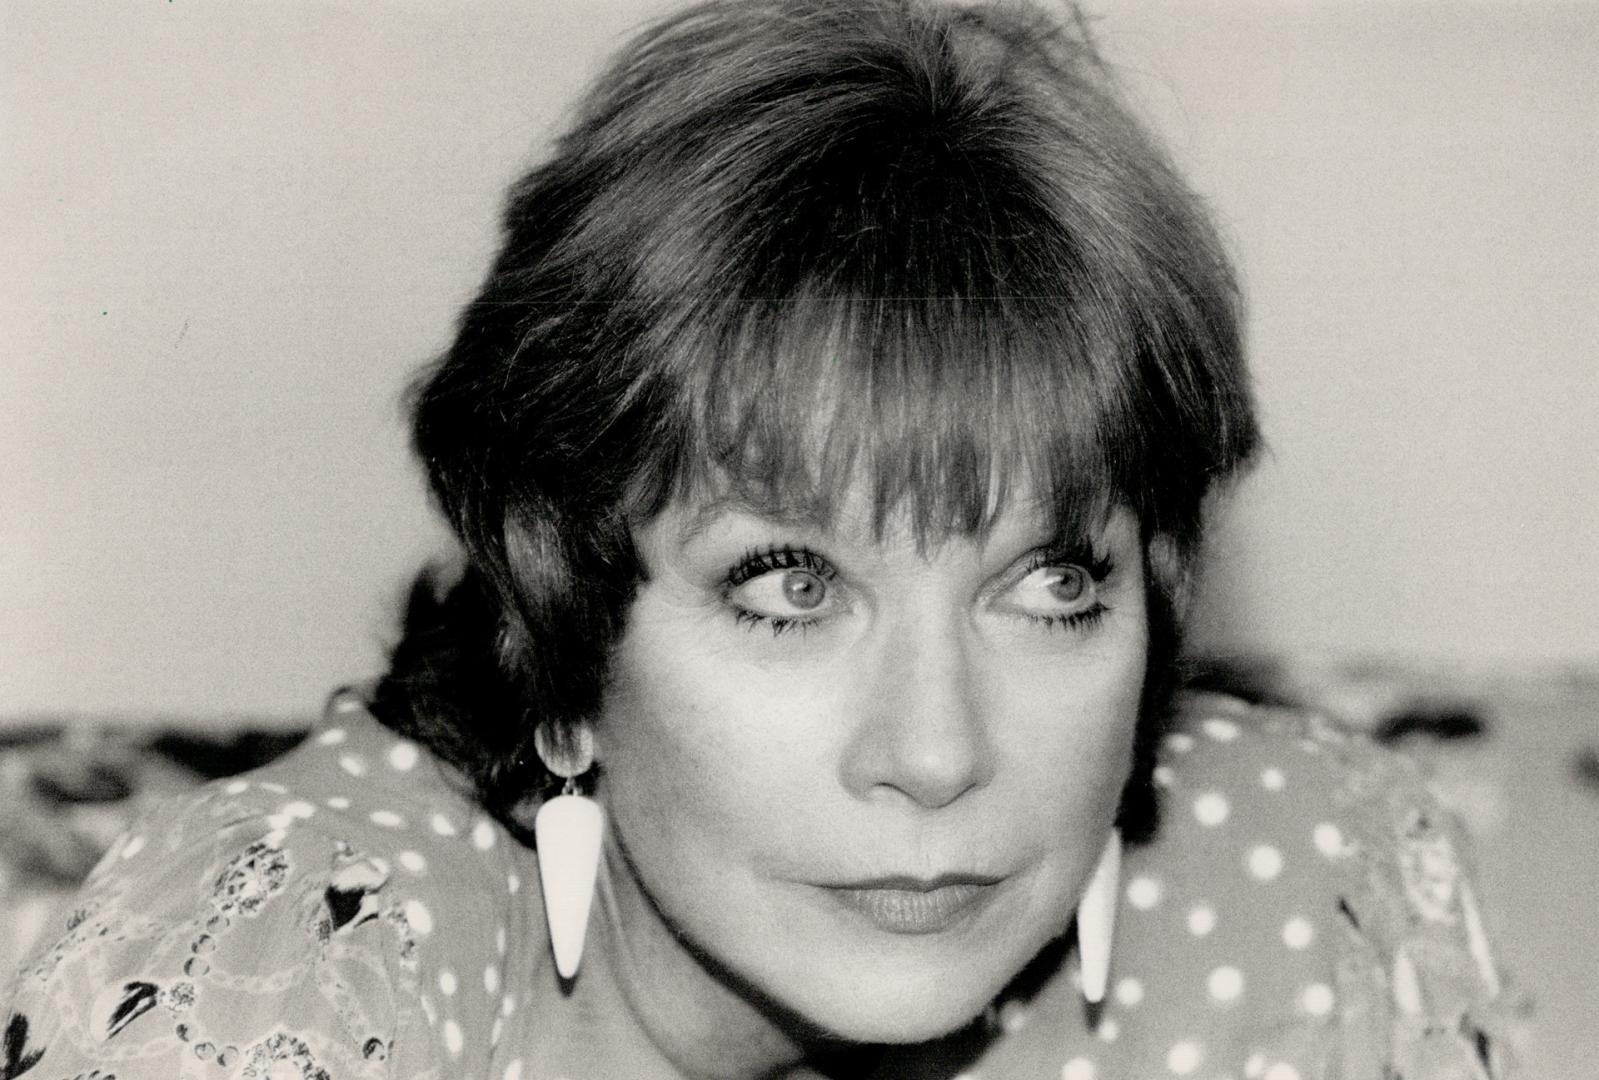 Shirley Maclaine turns 56 this month, with a one-woman show ans a new book coming out - another one about the meaning of life